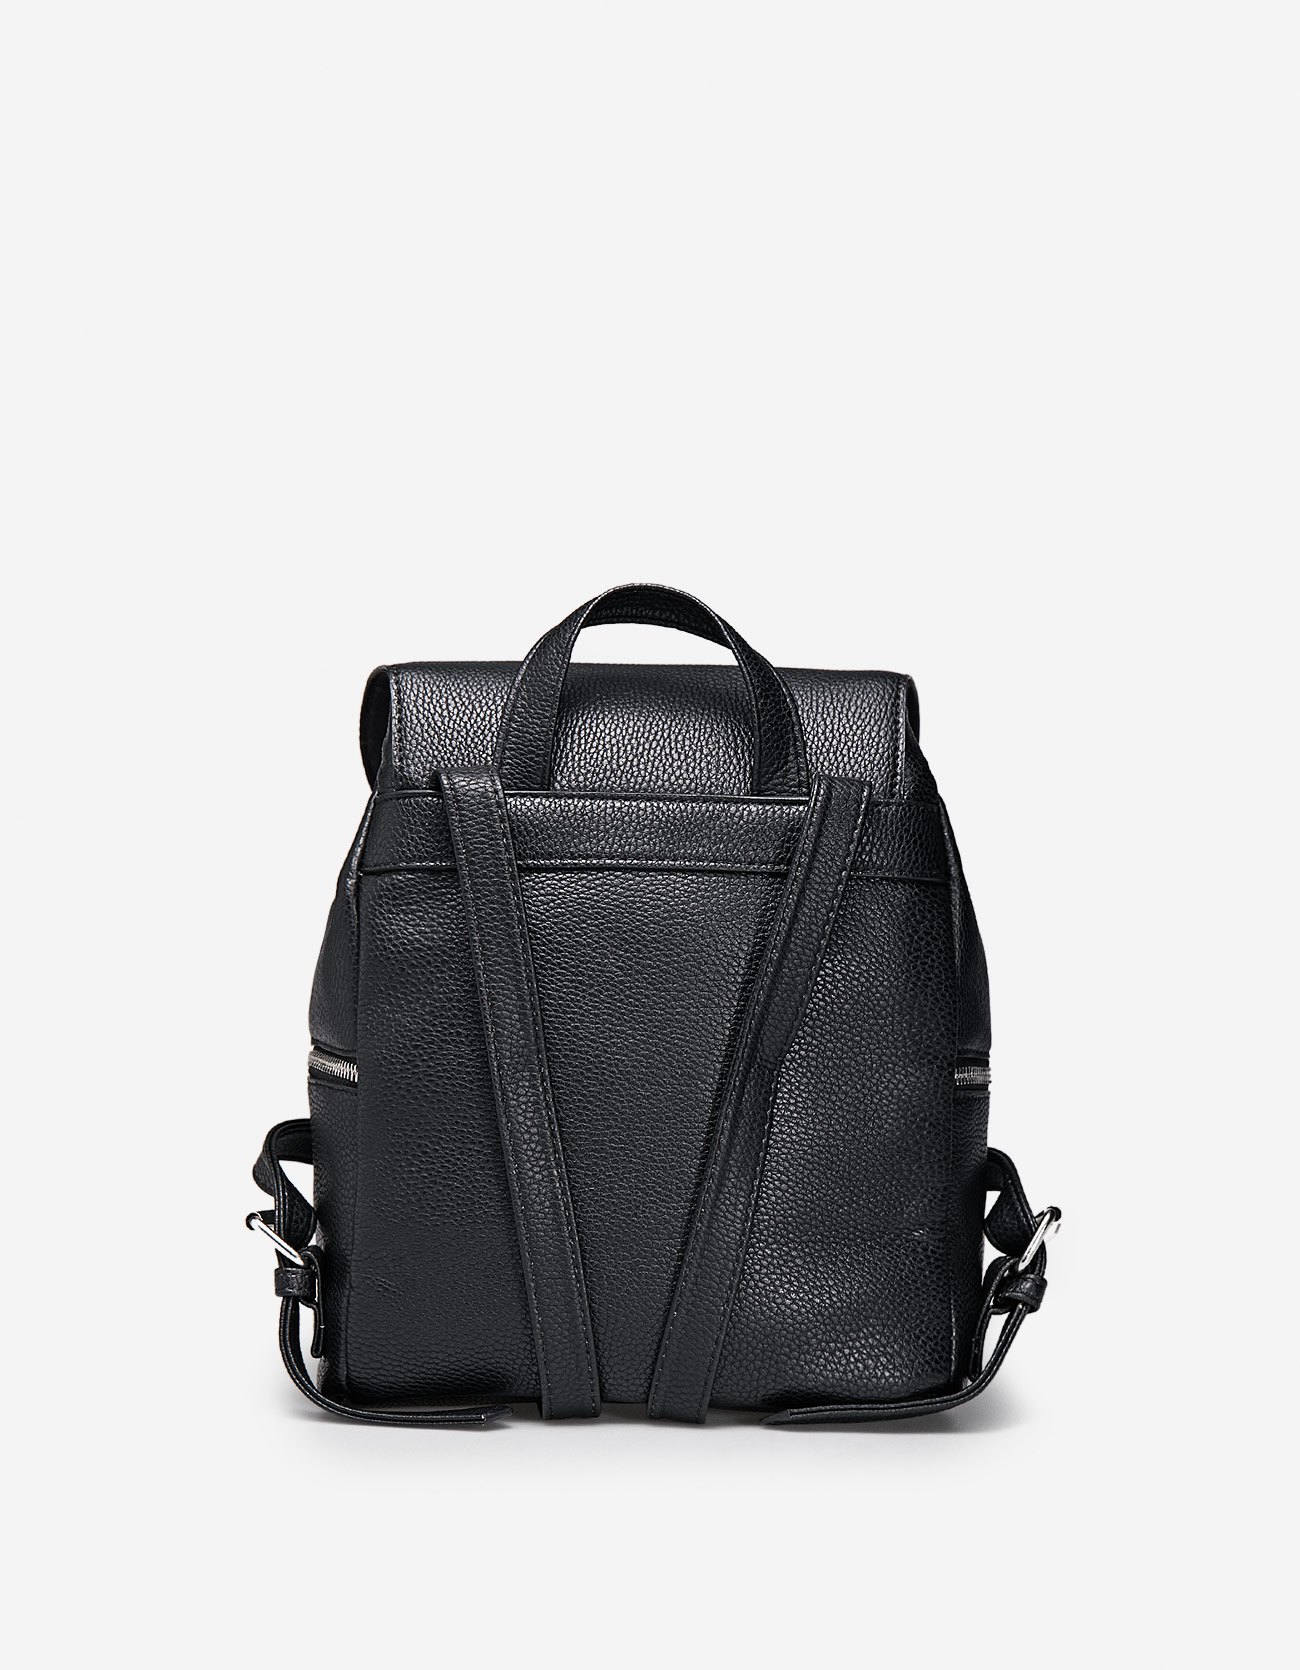 Stradivarius Mini Backpack With Flap In Black at Â£17.99 | love the brands